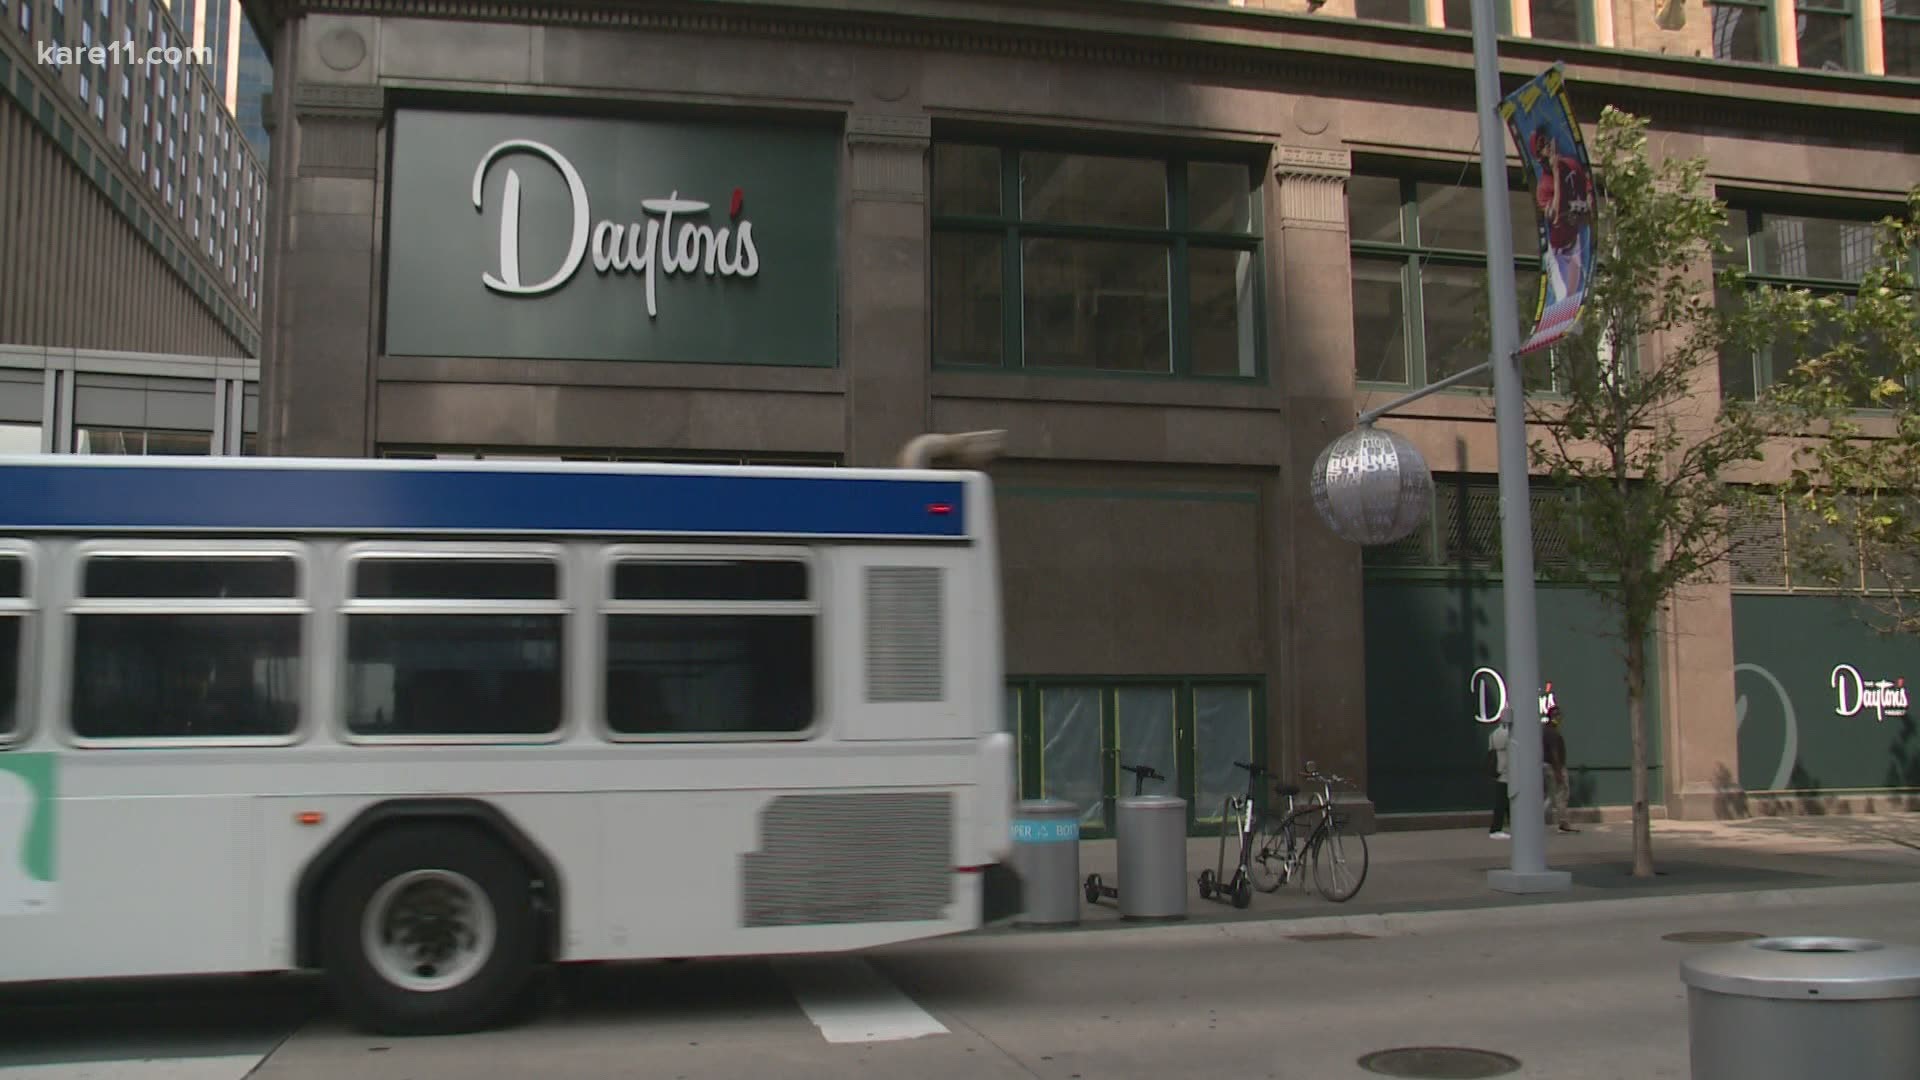 The Dayton's Project is ready for its first tenants but COVID-19 has put those plans on hold.